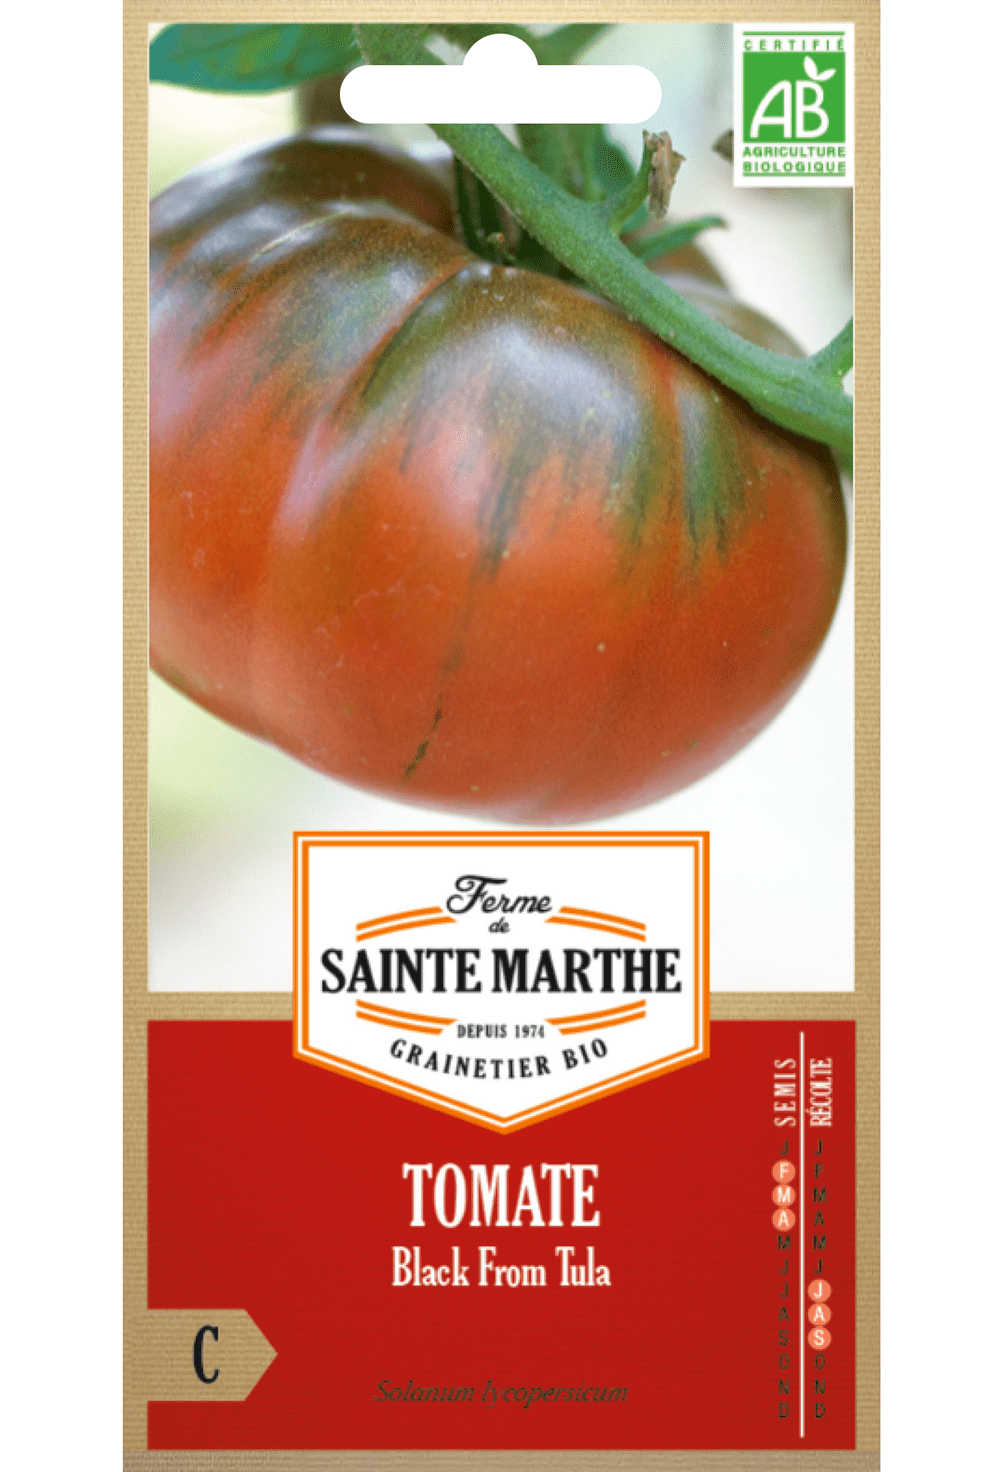 Tomate Black From Tula